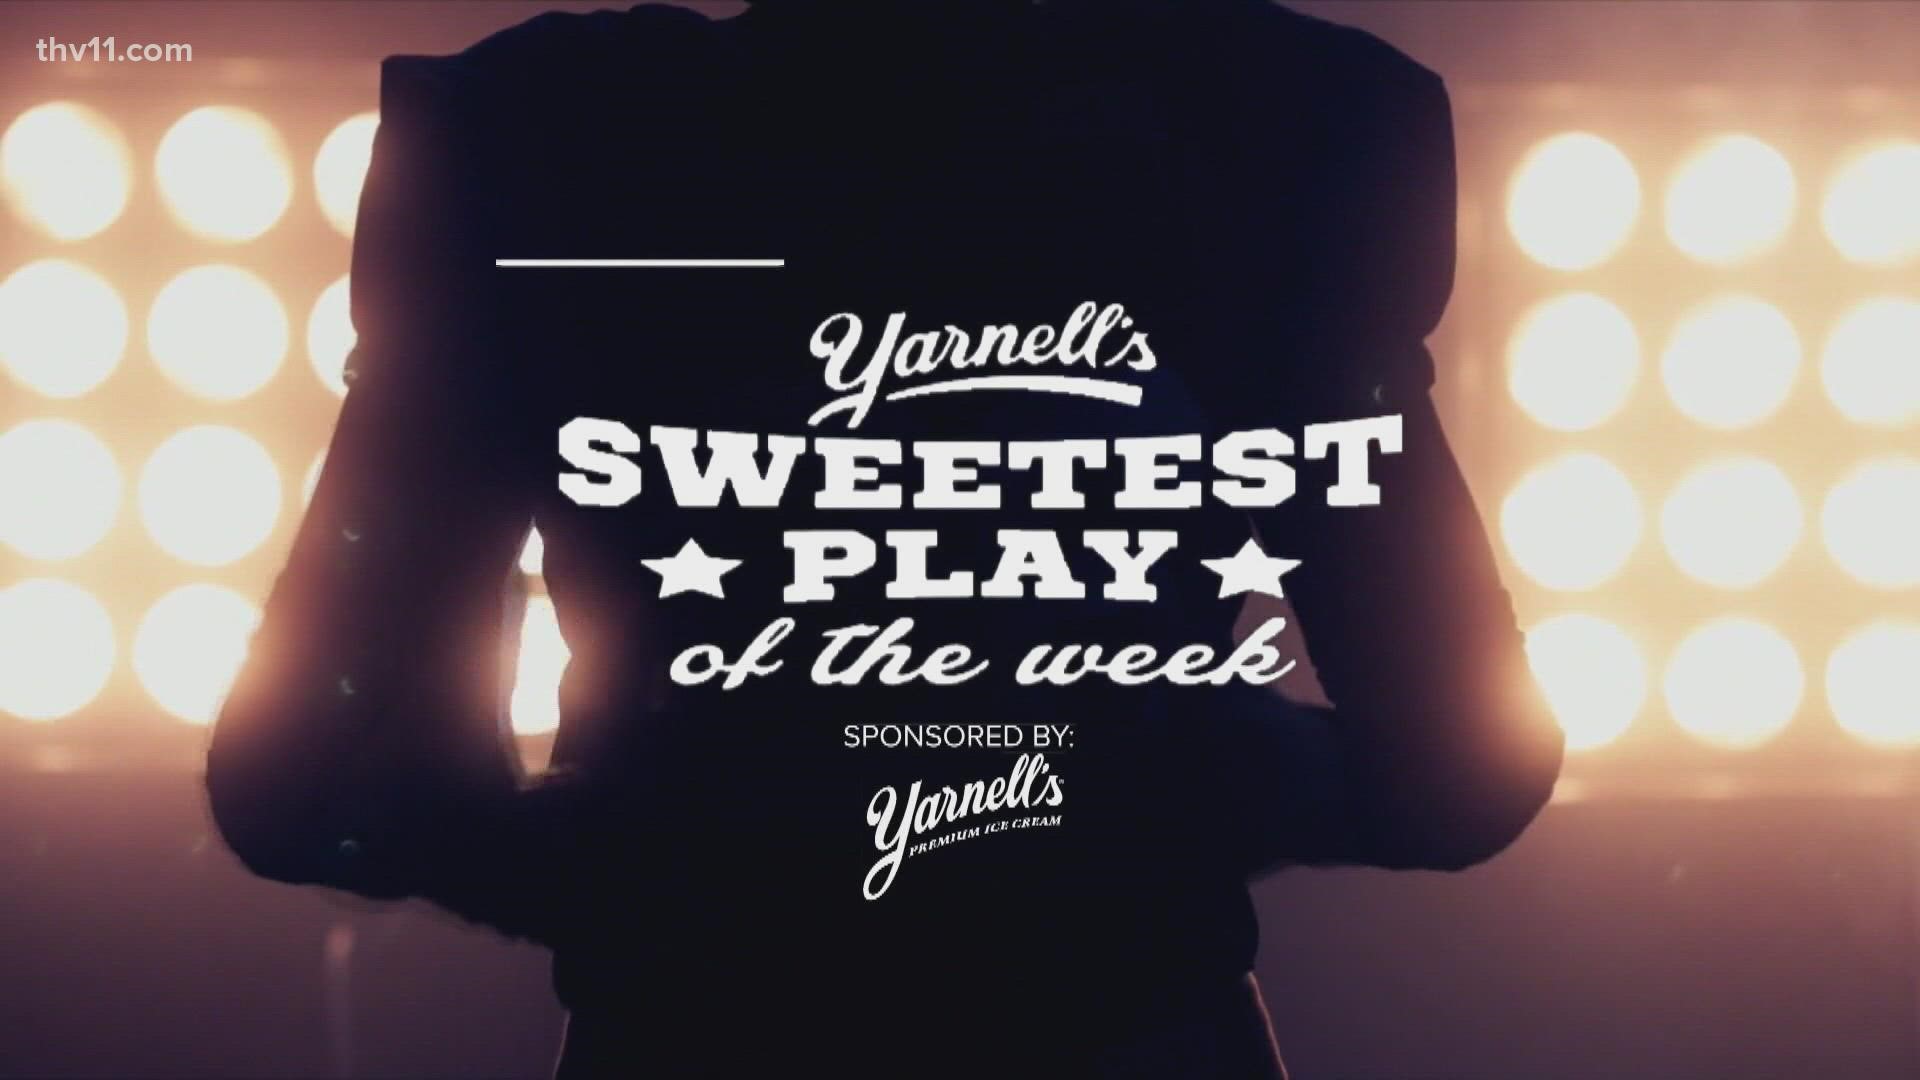 Vote for Yarnell's sweetest play! The winner gets an ice cream party. Voting closes at 5 PM on Tuesday